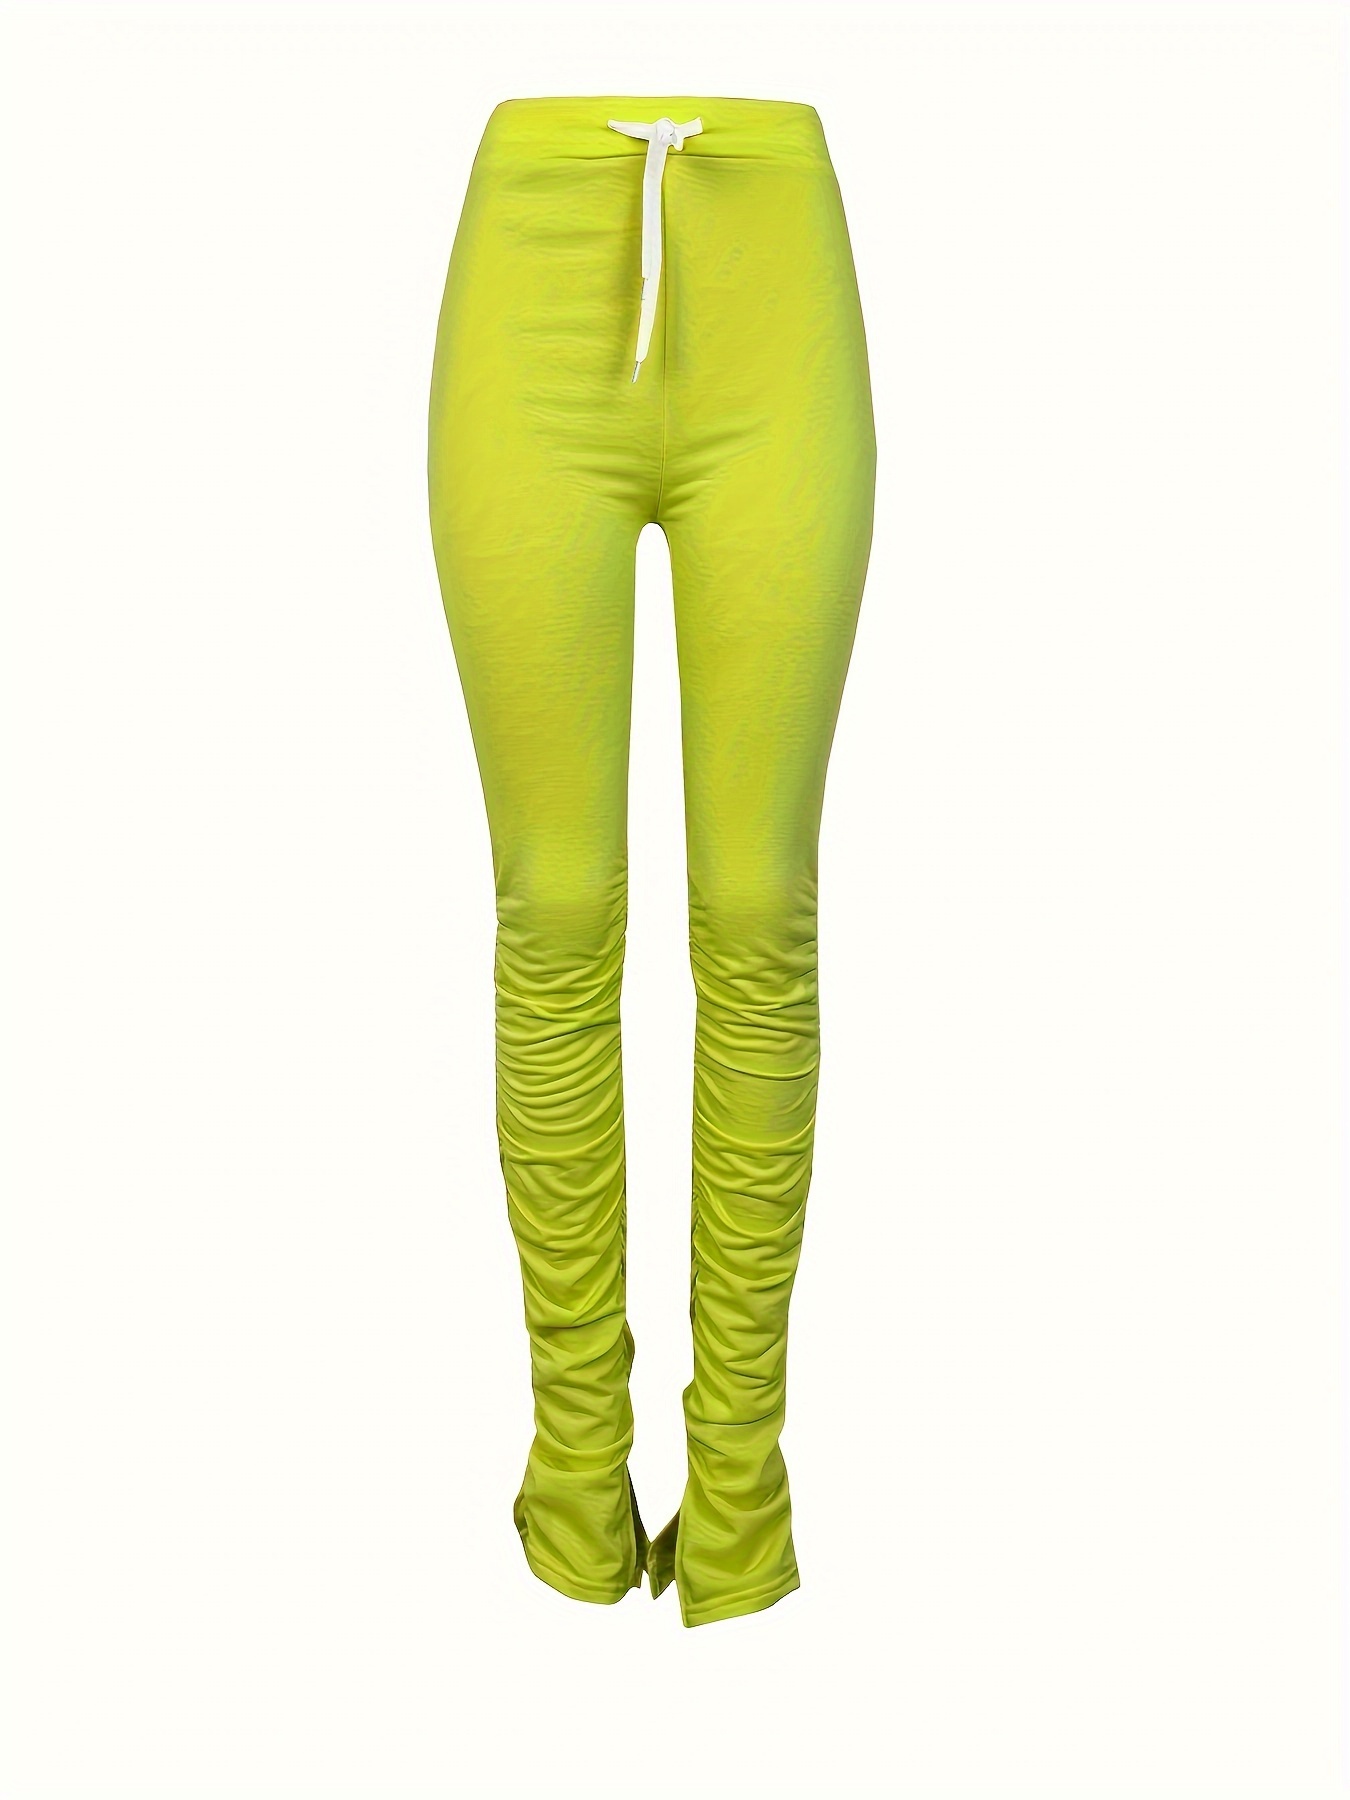 ADULT TIGHTS FULL LENGTH | PLAIN COLORS NEON GREEN